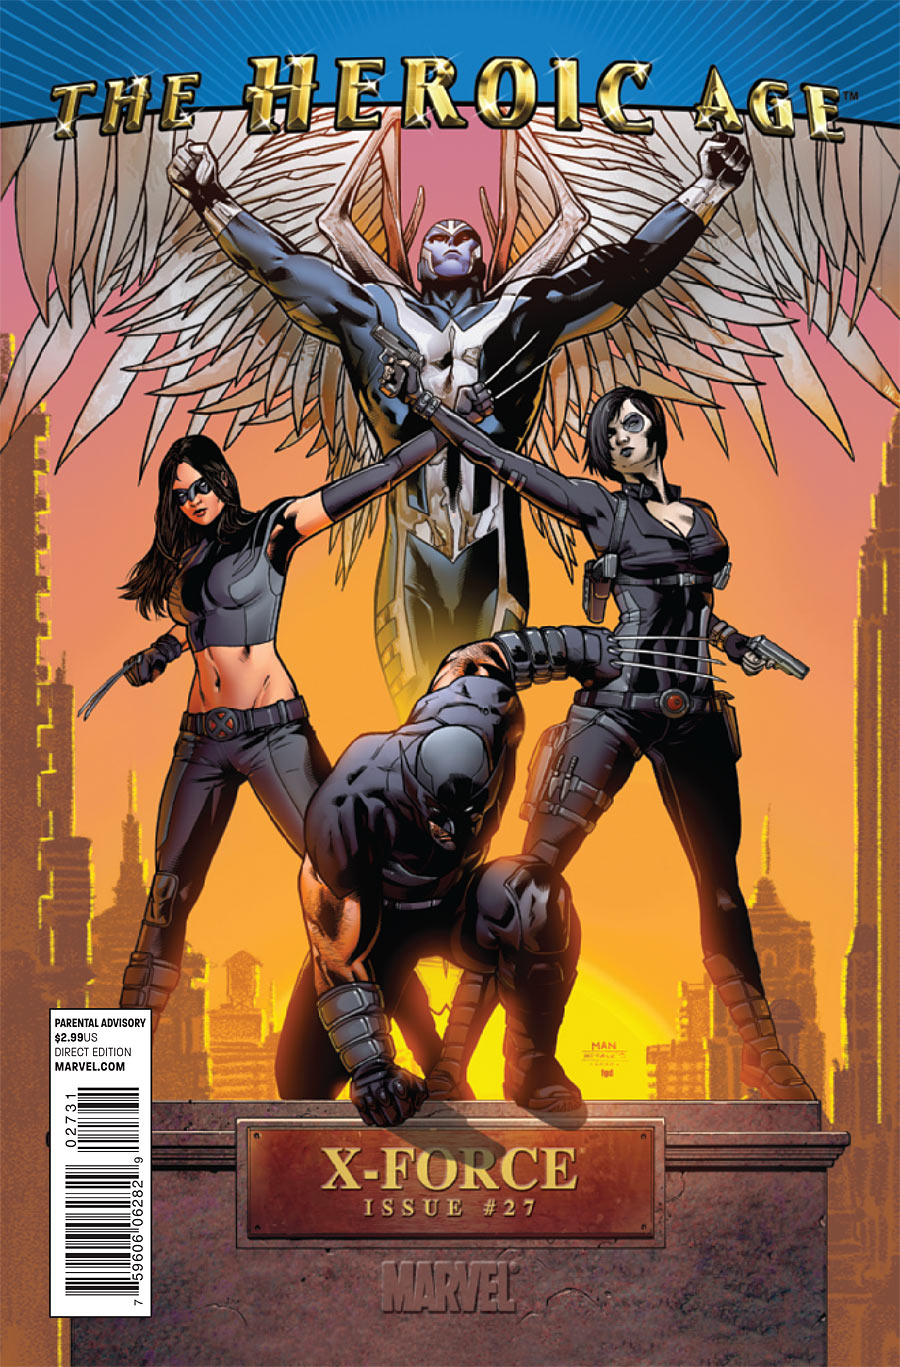 X-Force #27 (Heroic Age Variant Cover)